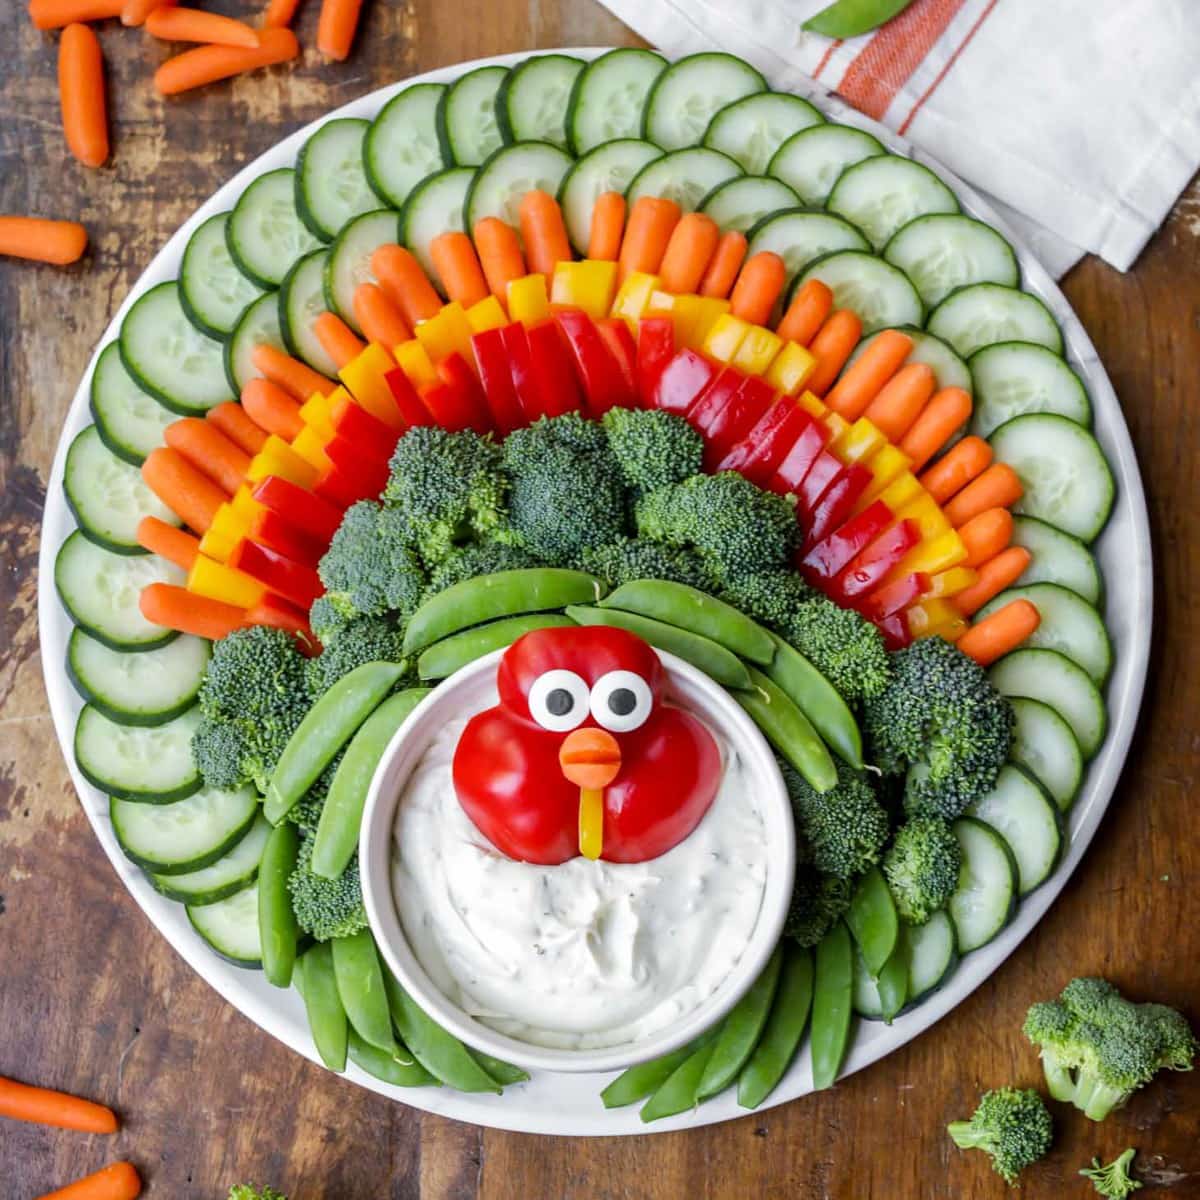 Turkey veggie tray with cucumbers, carrots, peppers, broccoli, and peas.